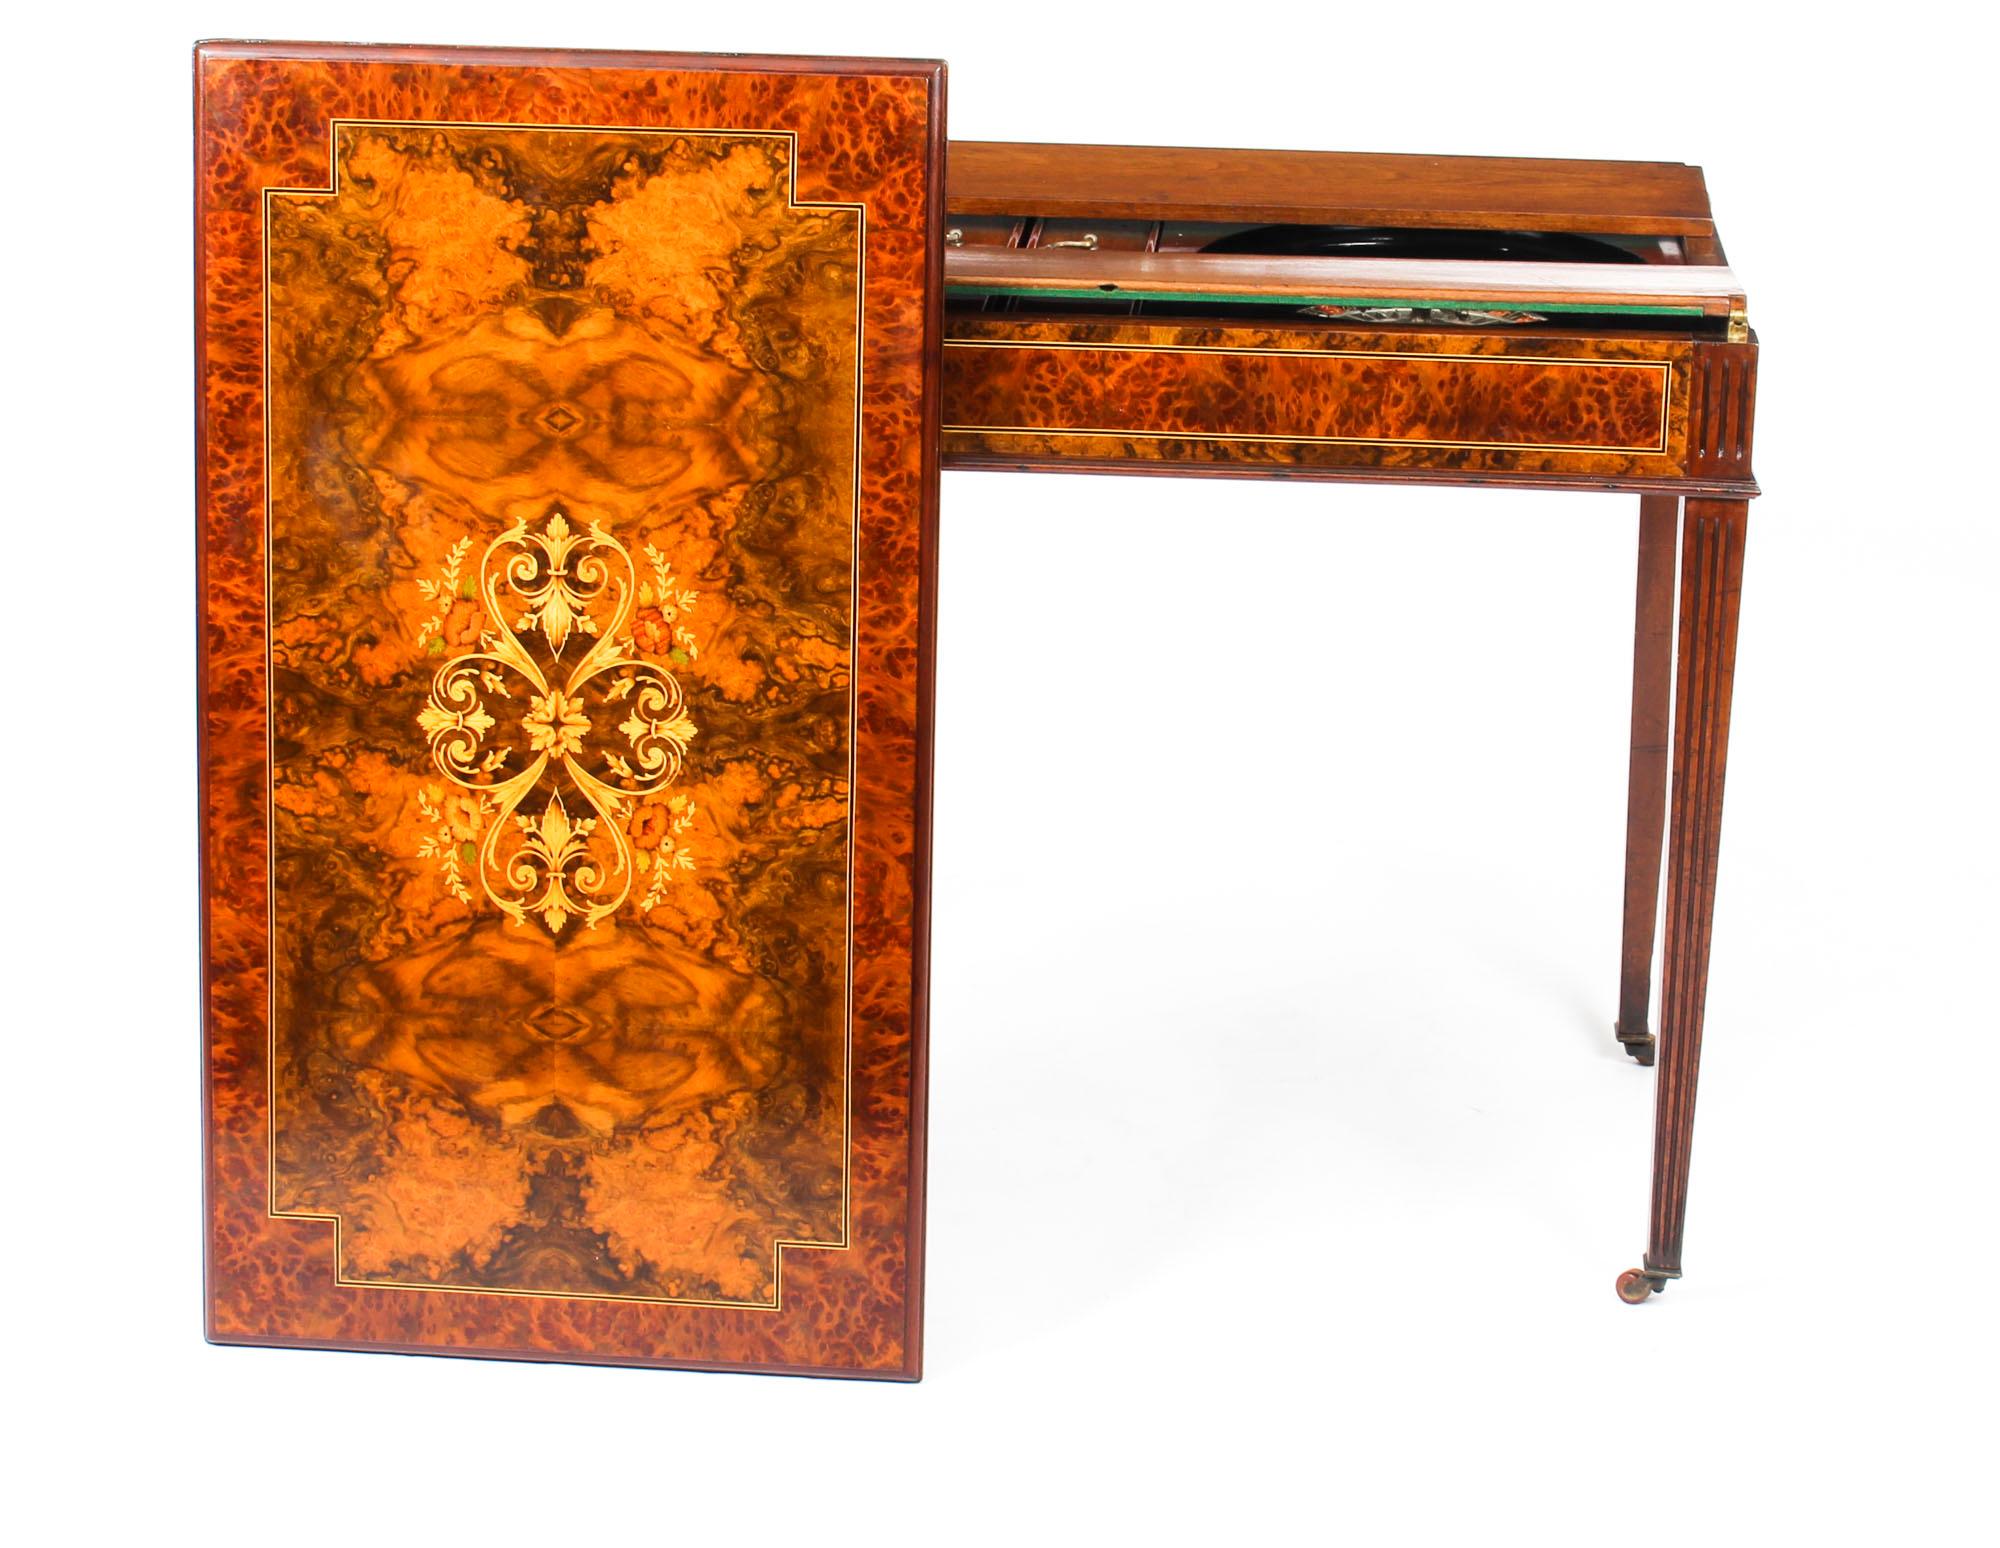 Mid-19th Century Antique French Burr Walnut Games Roulette Table, 19th Century